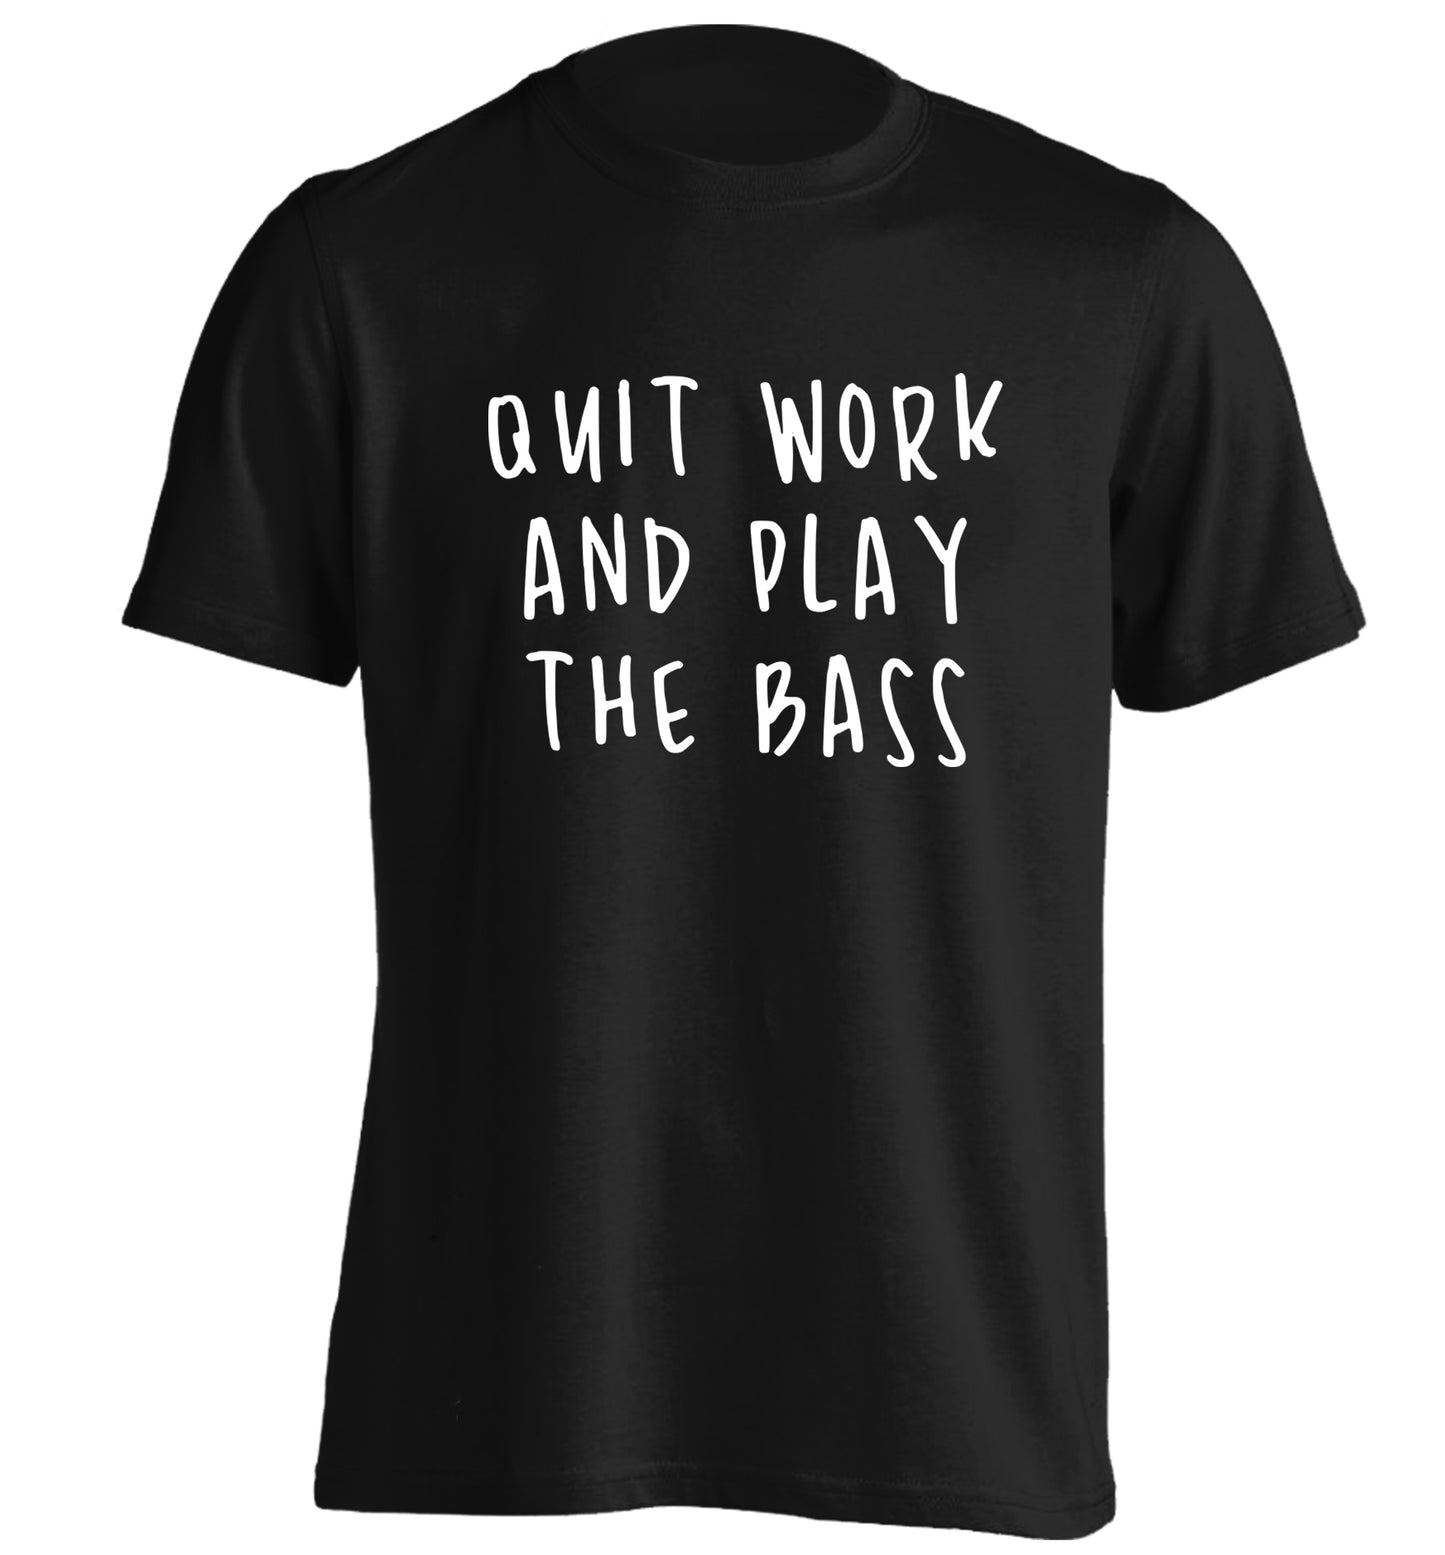 Quit work and play the bass adults unisex black Tshirt 2XL